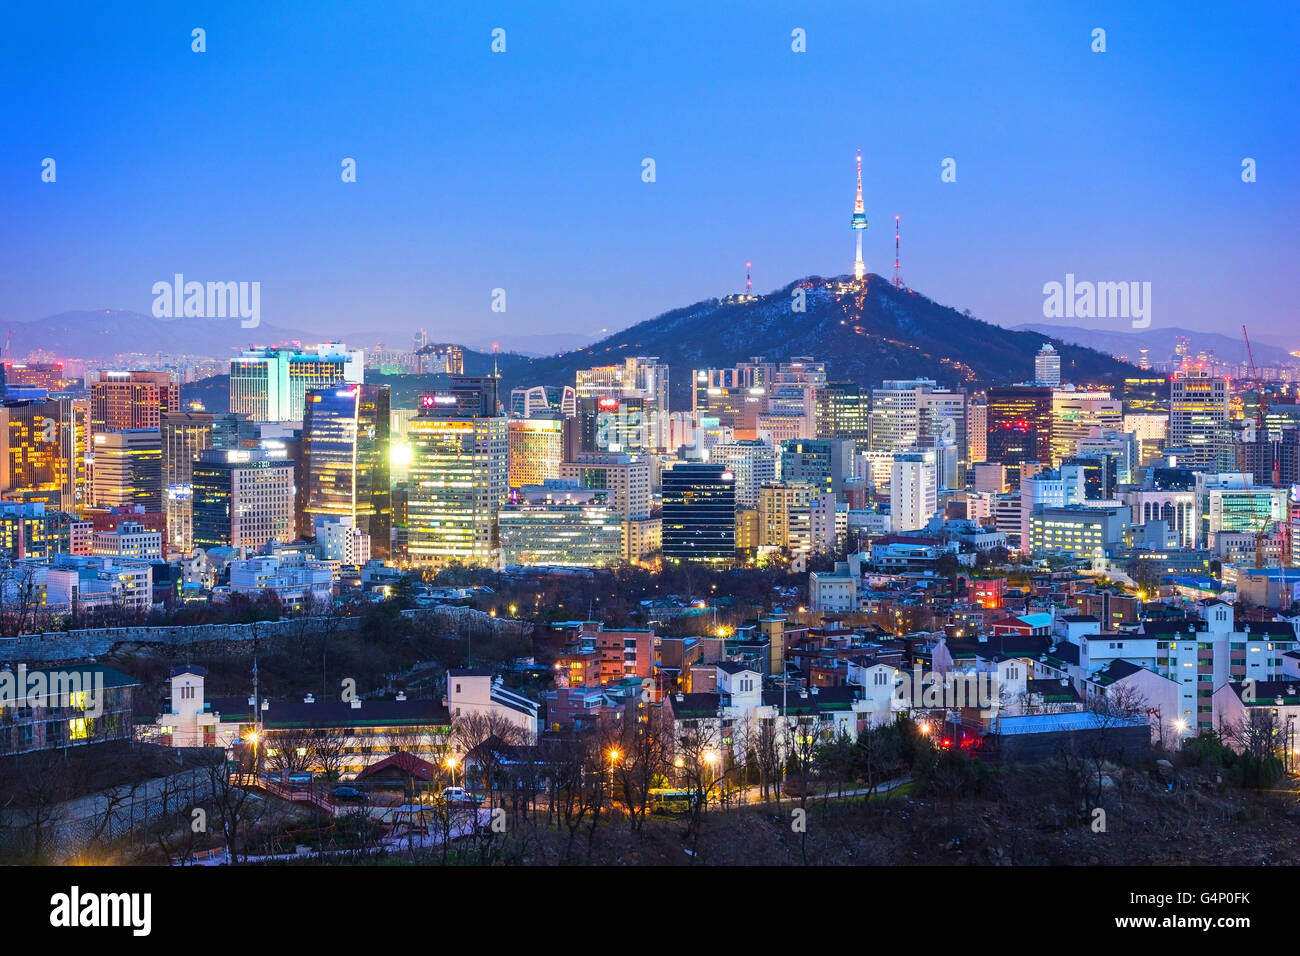 View of Seoul city skyline at night in South Korea. Stock Photo